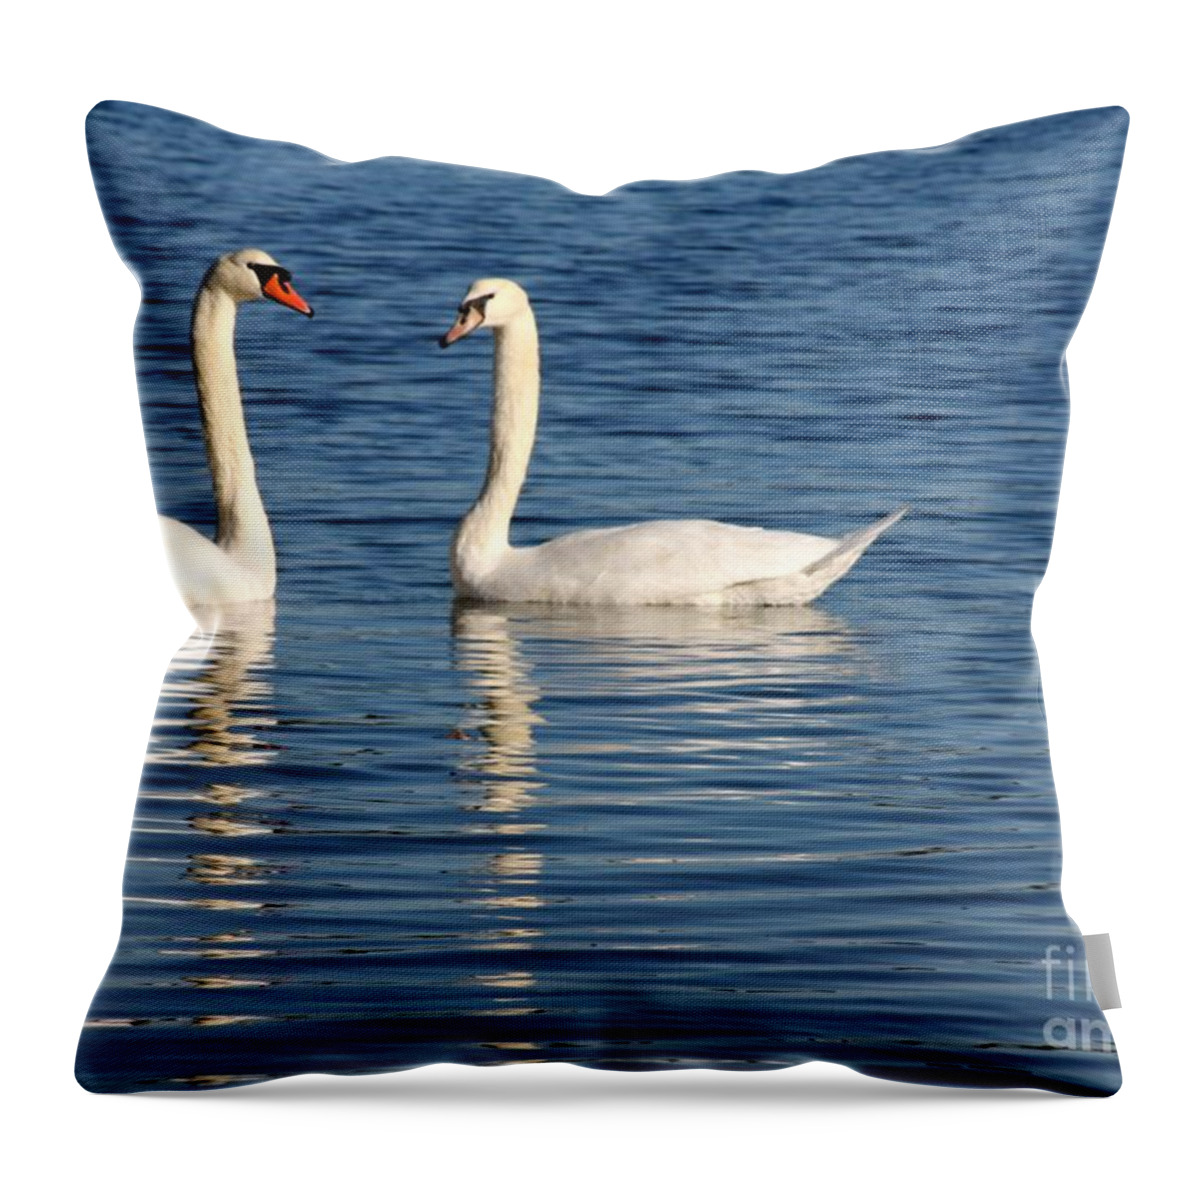 Swans Throw Pillow featuring the photograph Swan Mates by Sabrina L Ryan